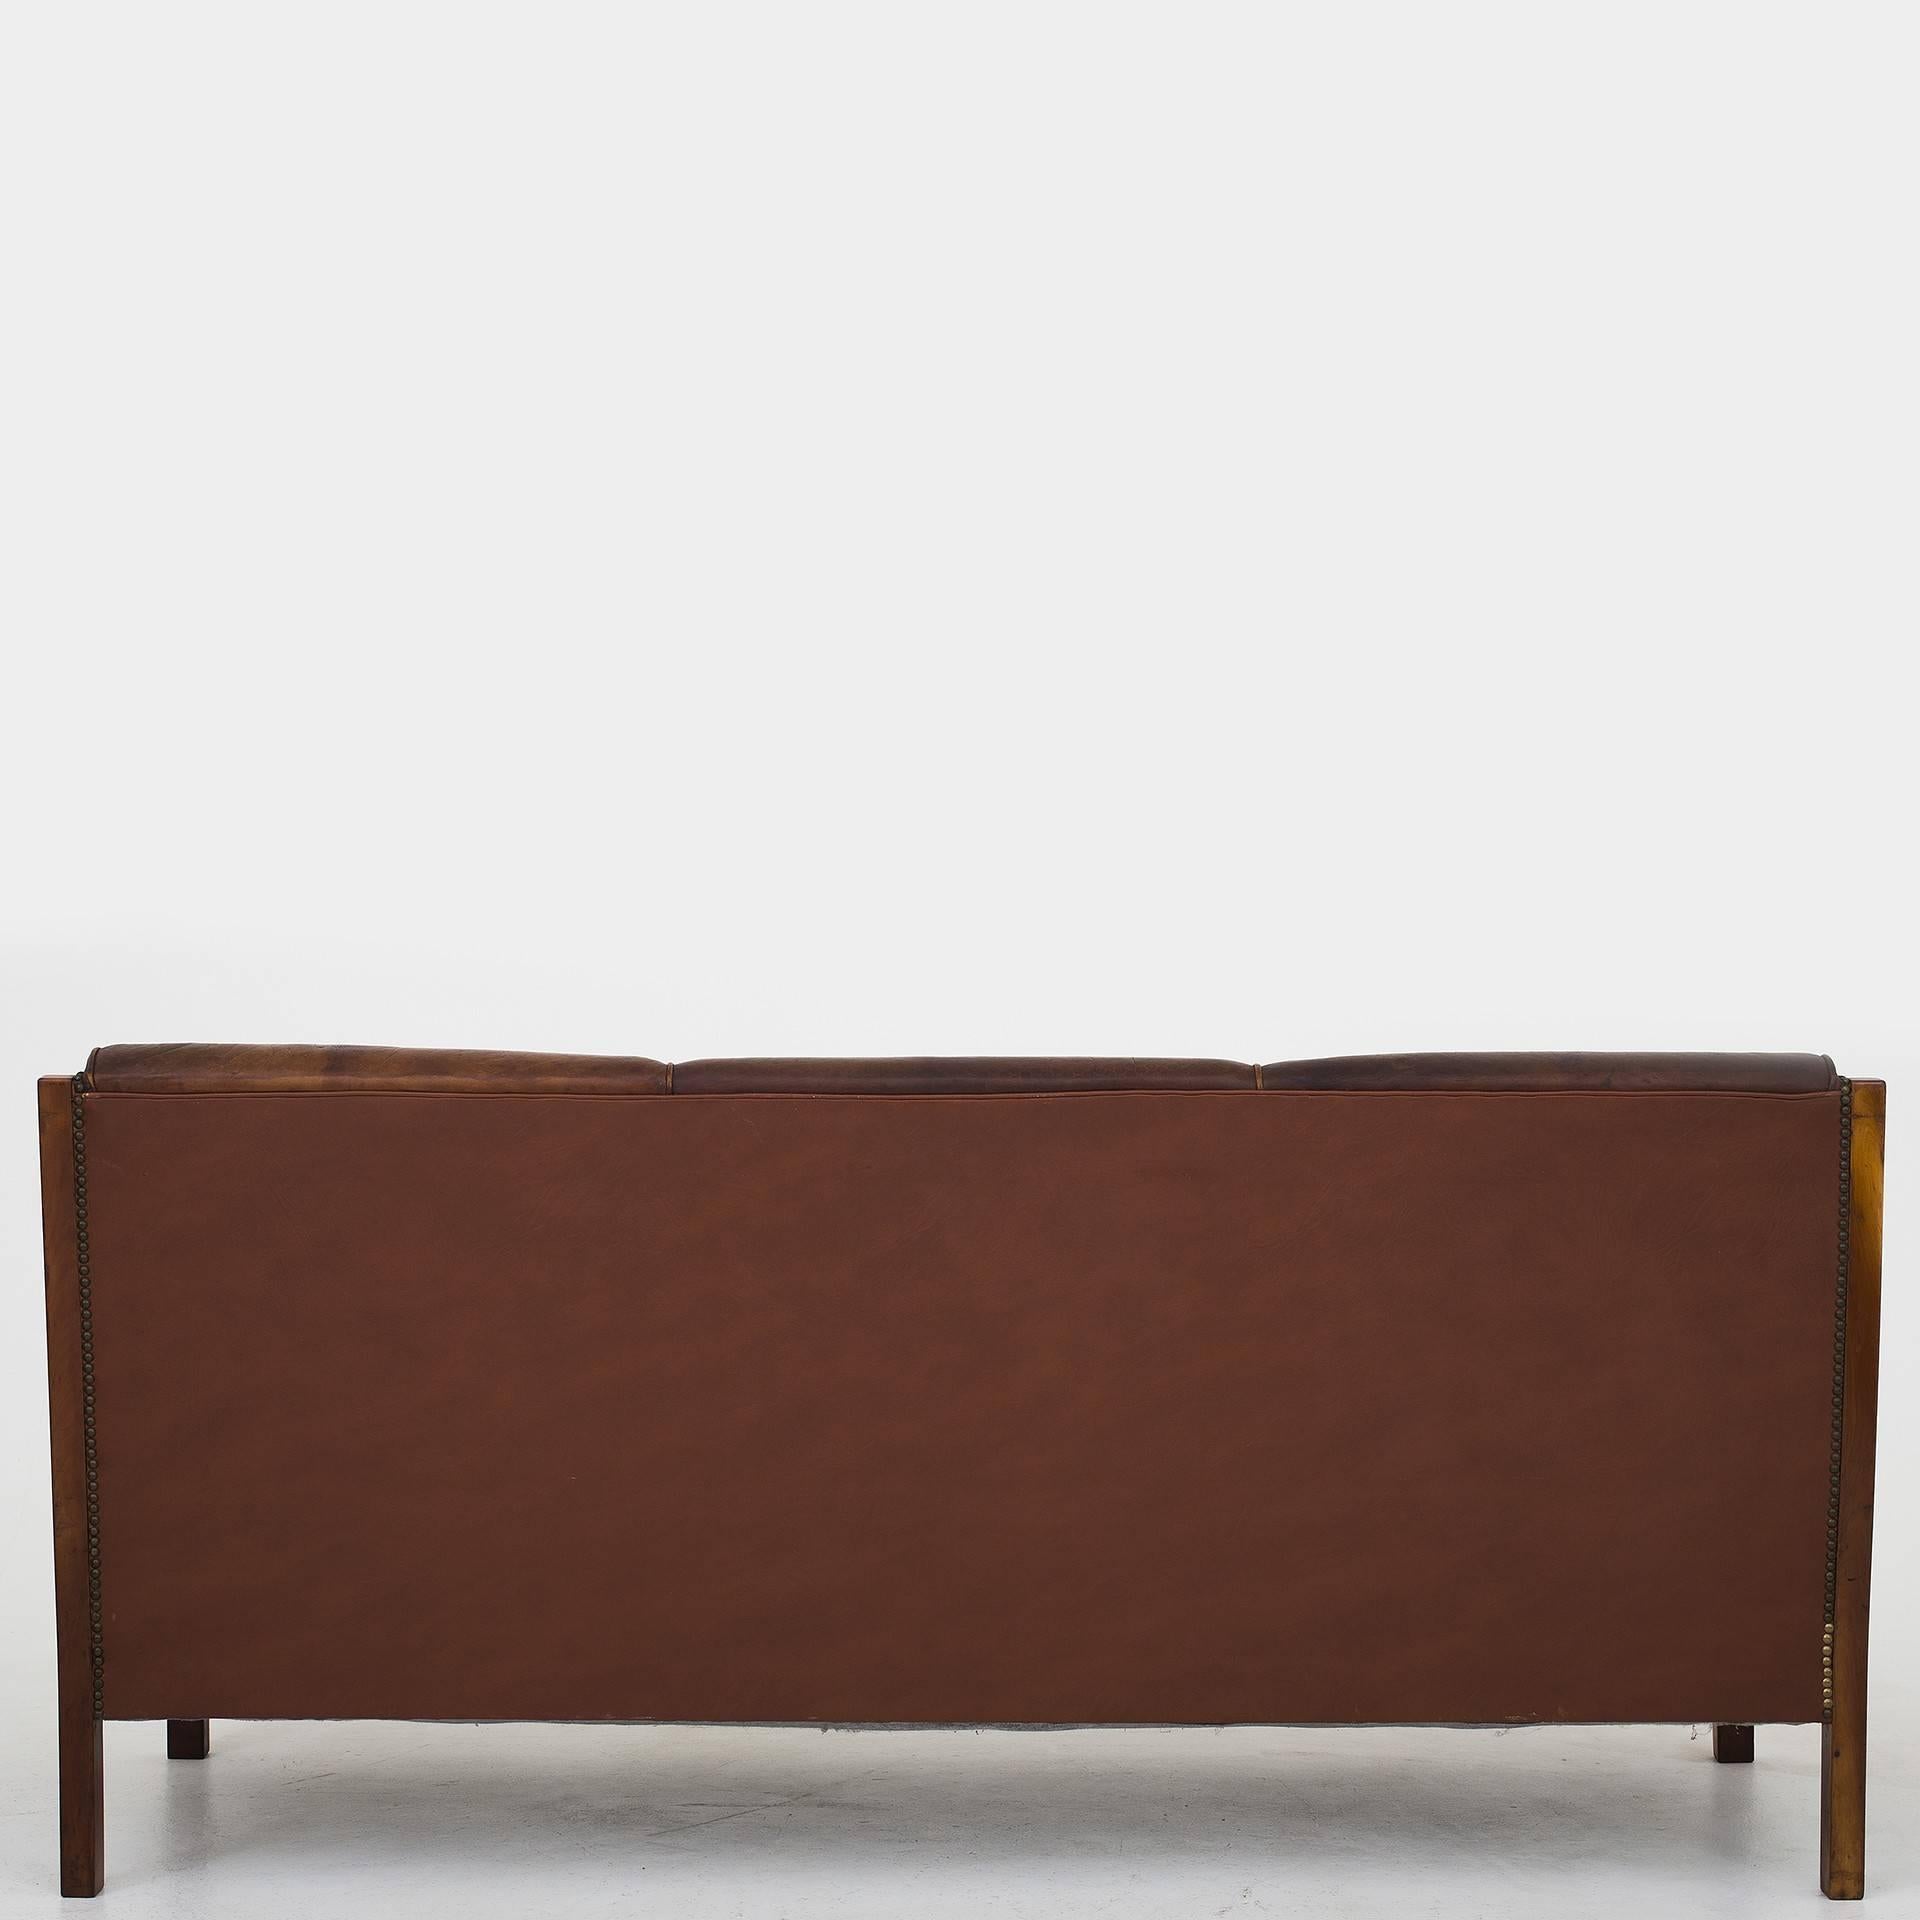 Two chairs and matching three-seat sofa in original, natural Niger leather with nails in brass. Frame in Cuba mahogany. Unknown Danish cabinetmaker, circa 1930.